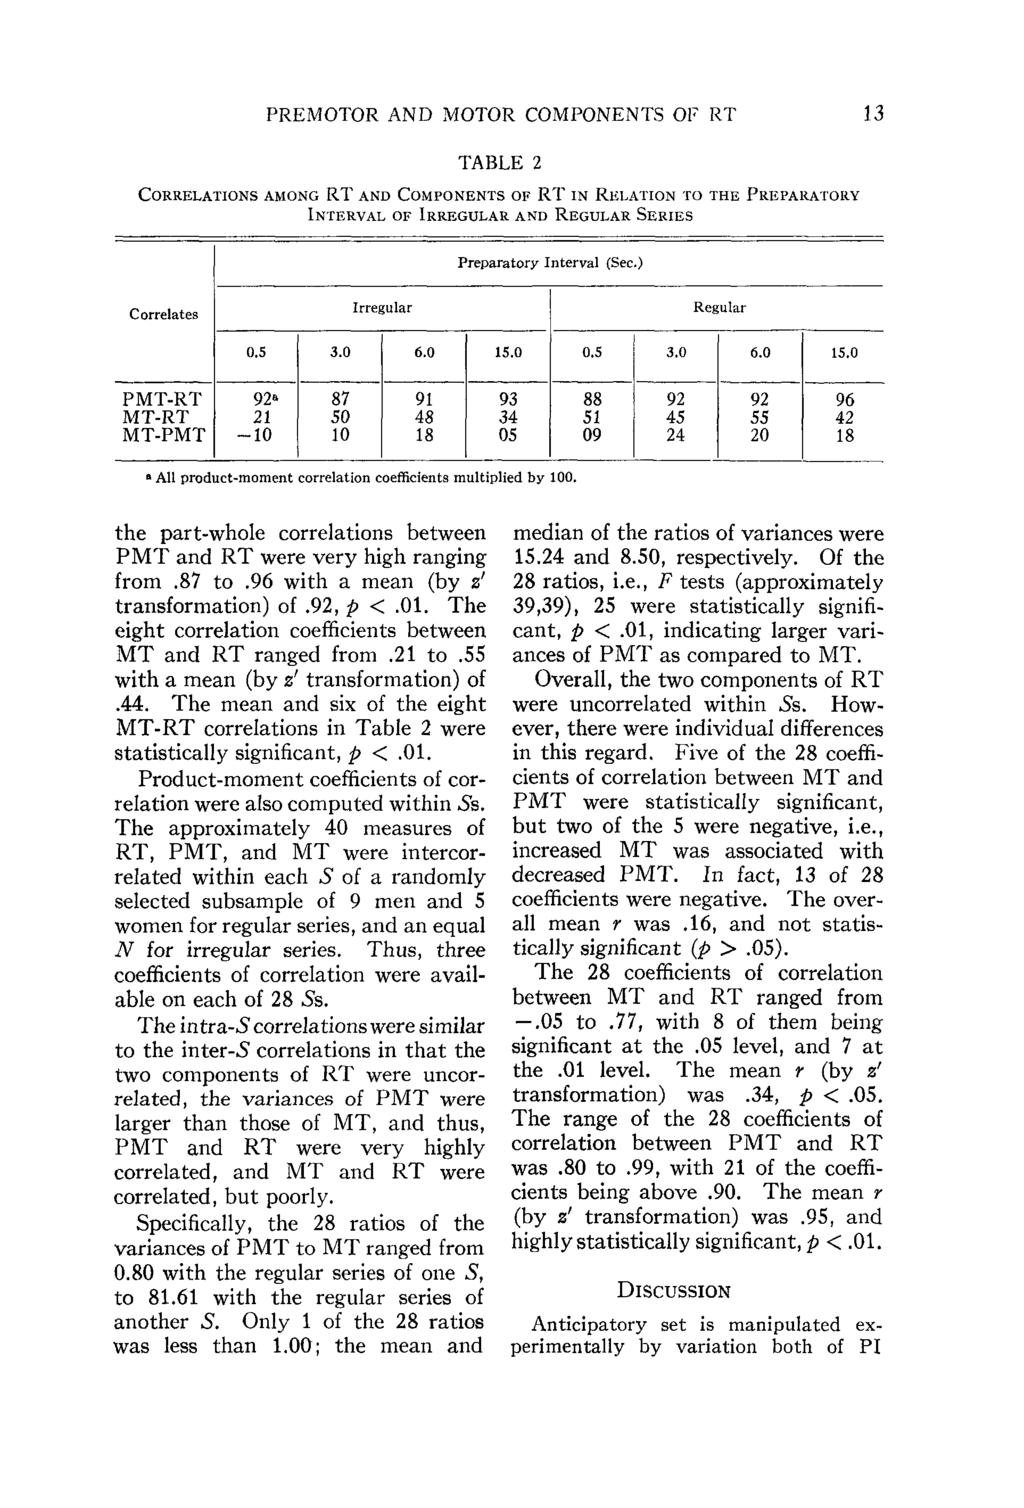 PREMOTOR AND MOTOR COMPONENTS OF RT 13 TABLE 2 CORRELATIONS AMONG RT AND COMPONENTS OF RT IN RELATION TO THE PREPARATORY INTERVAL OF IRREGULAR AND REGULAR SERIES Preparatory Interval (Sec.